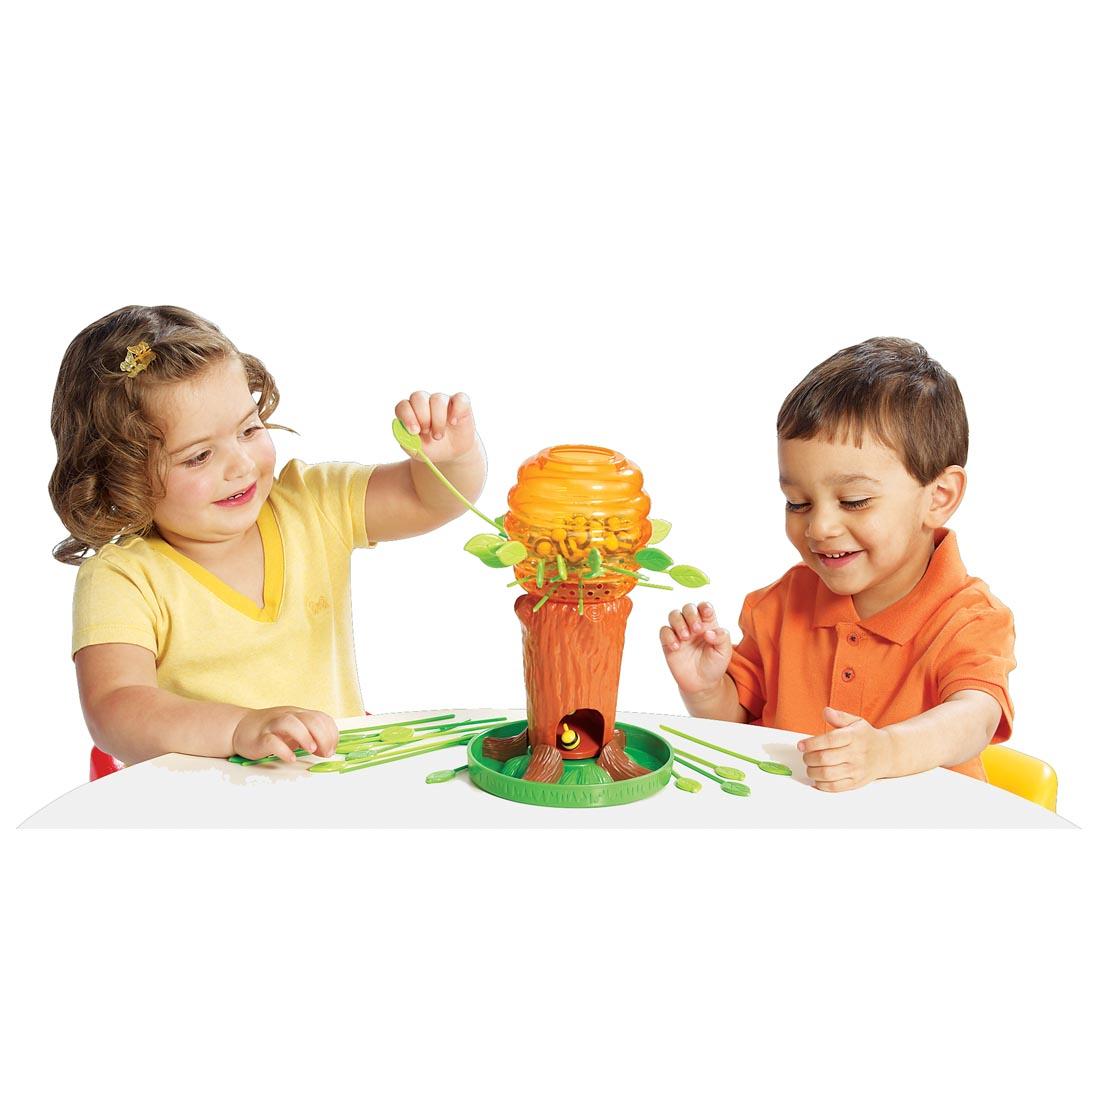 Two children playing the Honey Bee Tree Game by International Playthings